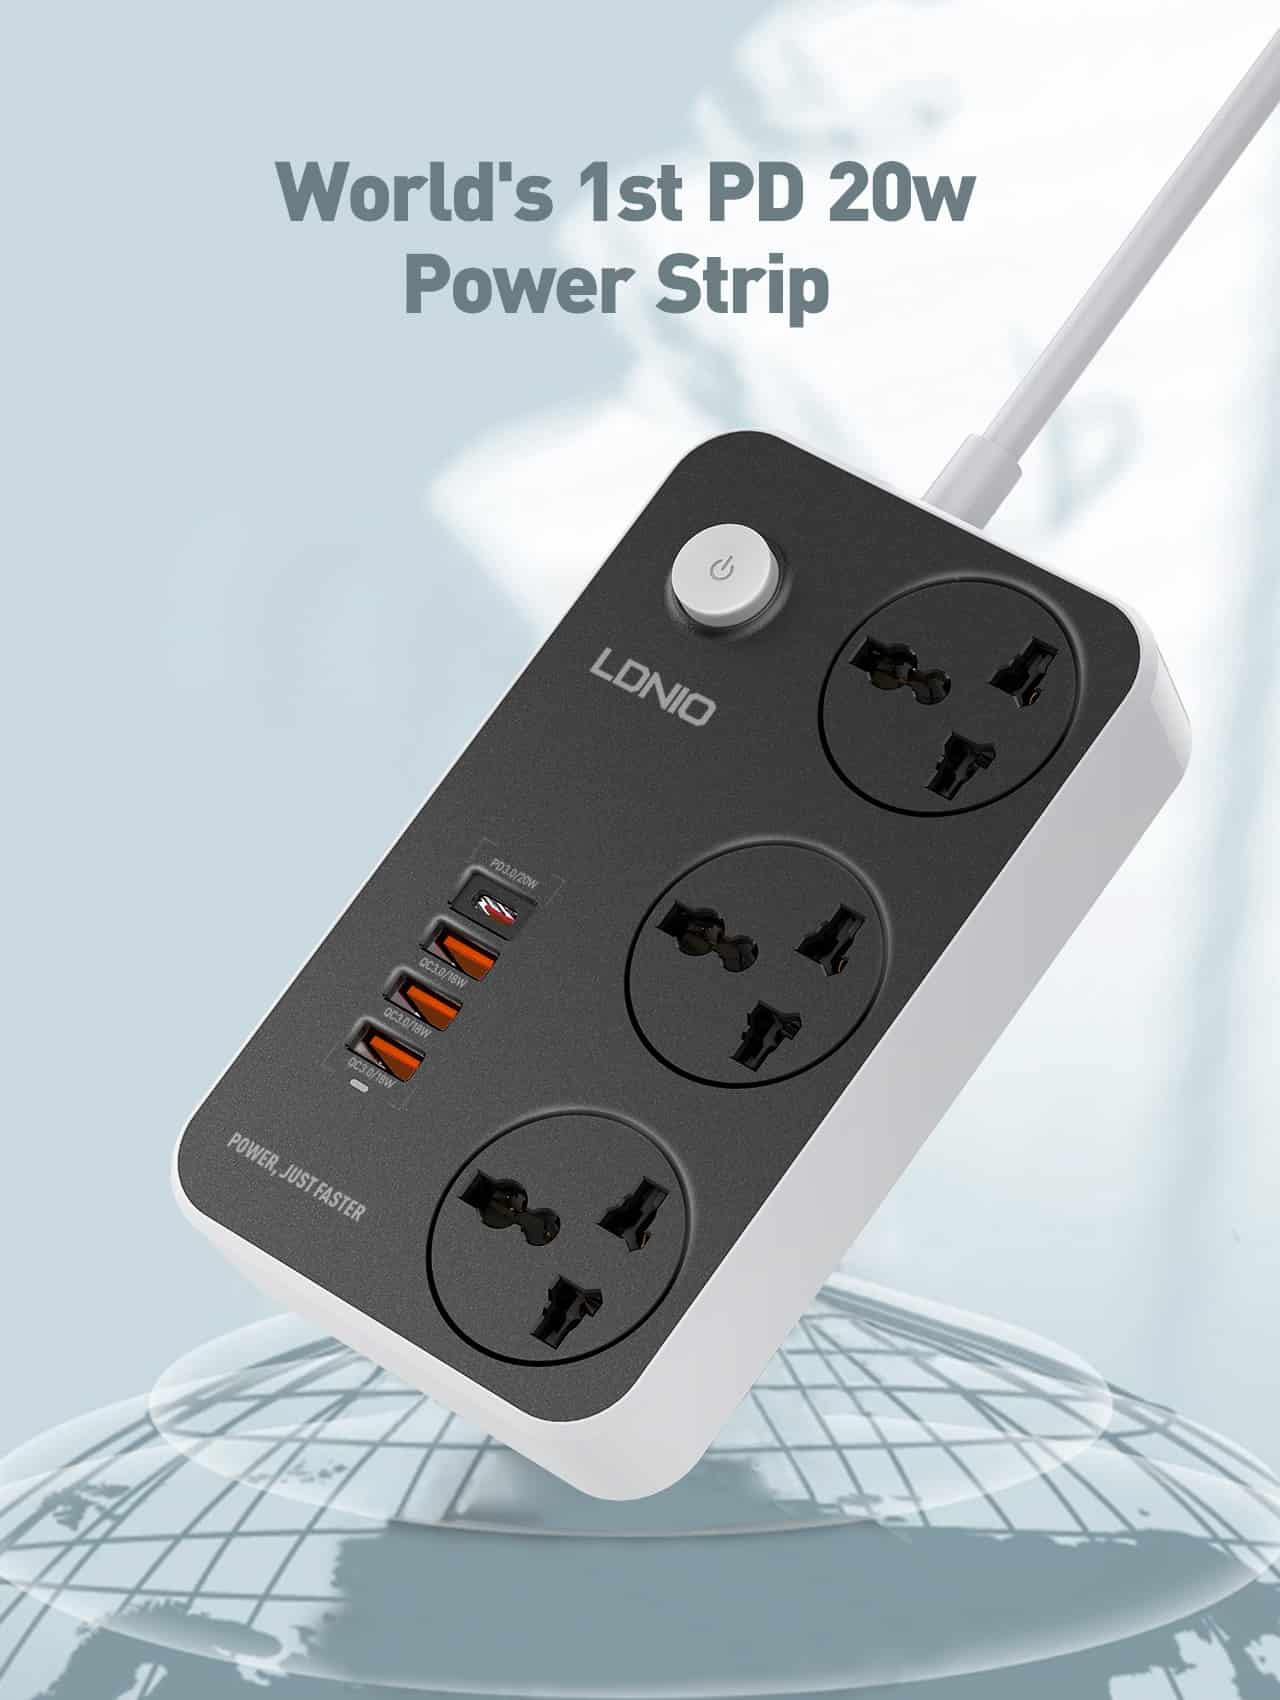 ldnio sc3412 10a 2500w power strip extension with 3x multi 250v power sockets 1x type-c pd 3.0 20w 3x qc 3.0 18w usb ports